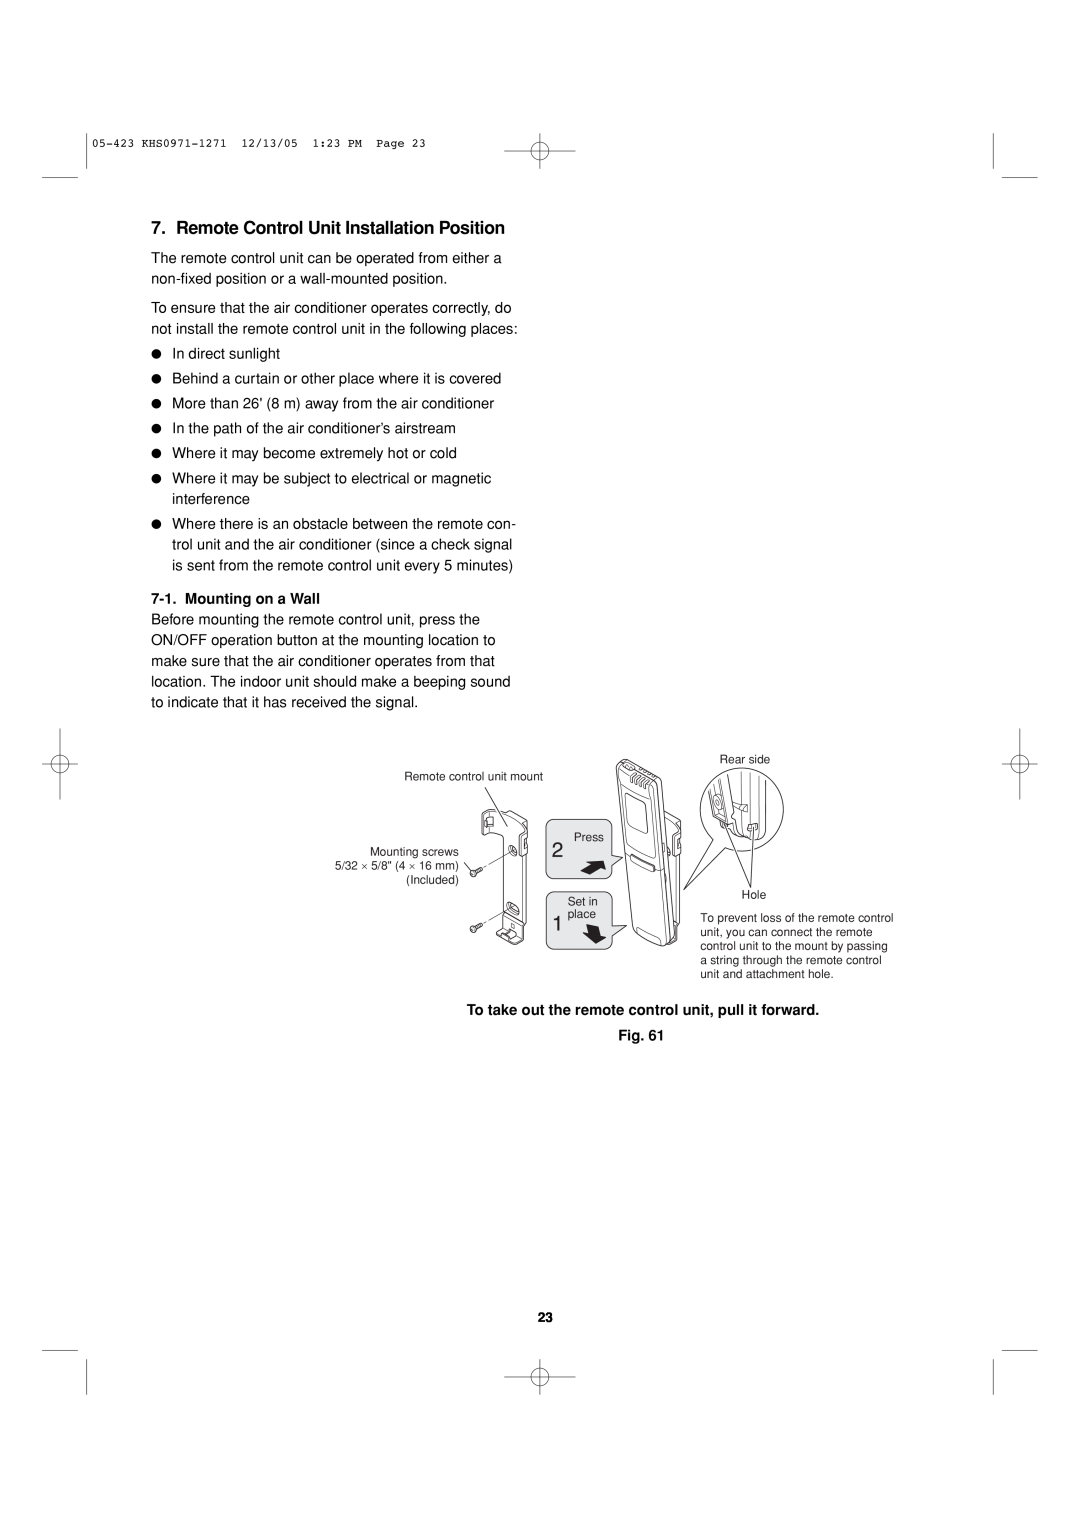 Sanyo 8.53E+13 installation instructions Remote Control Unit Installation Position, Mounting on a Wall 